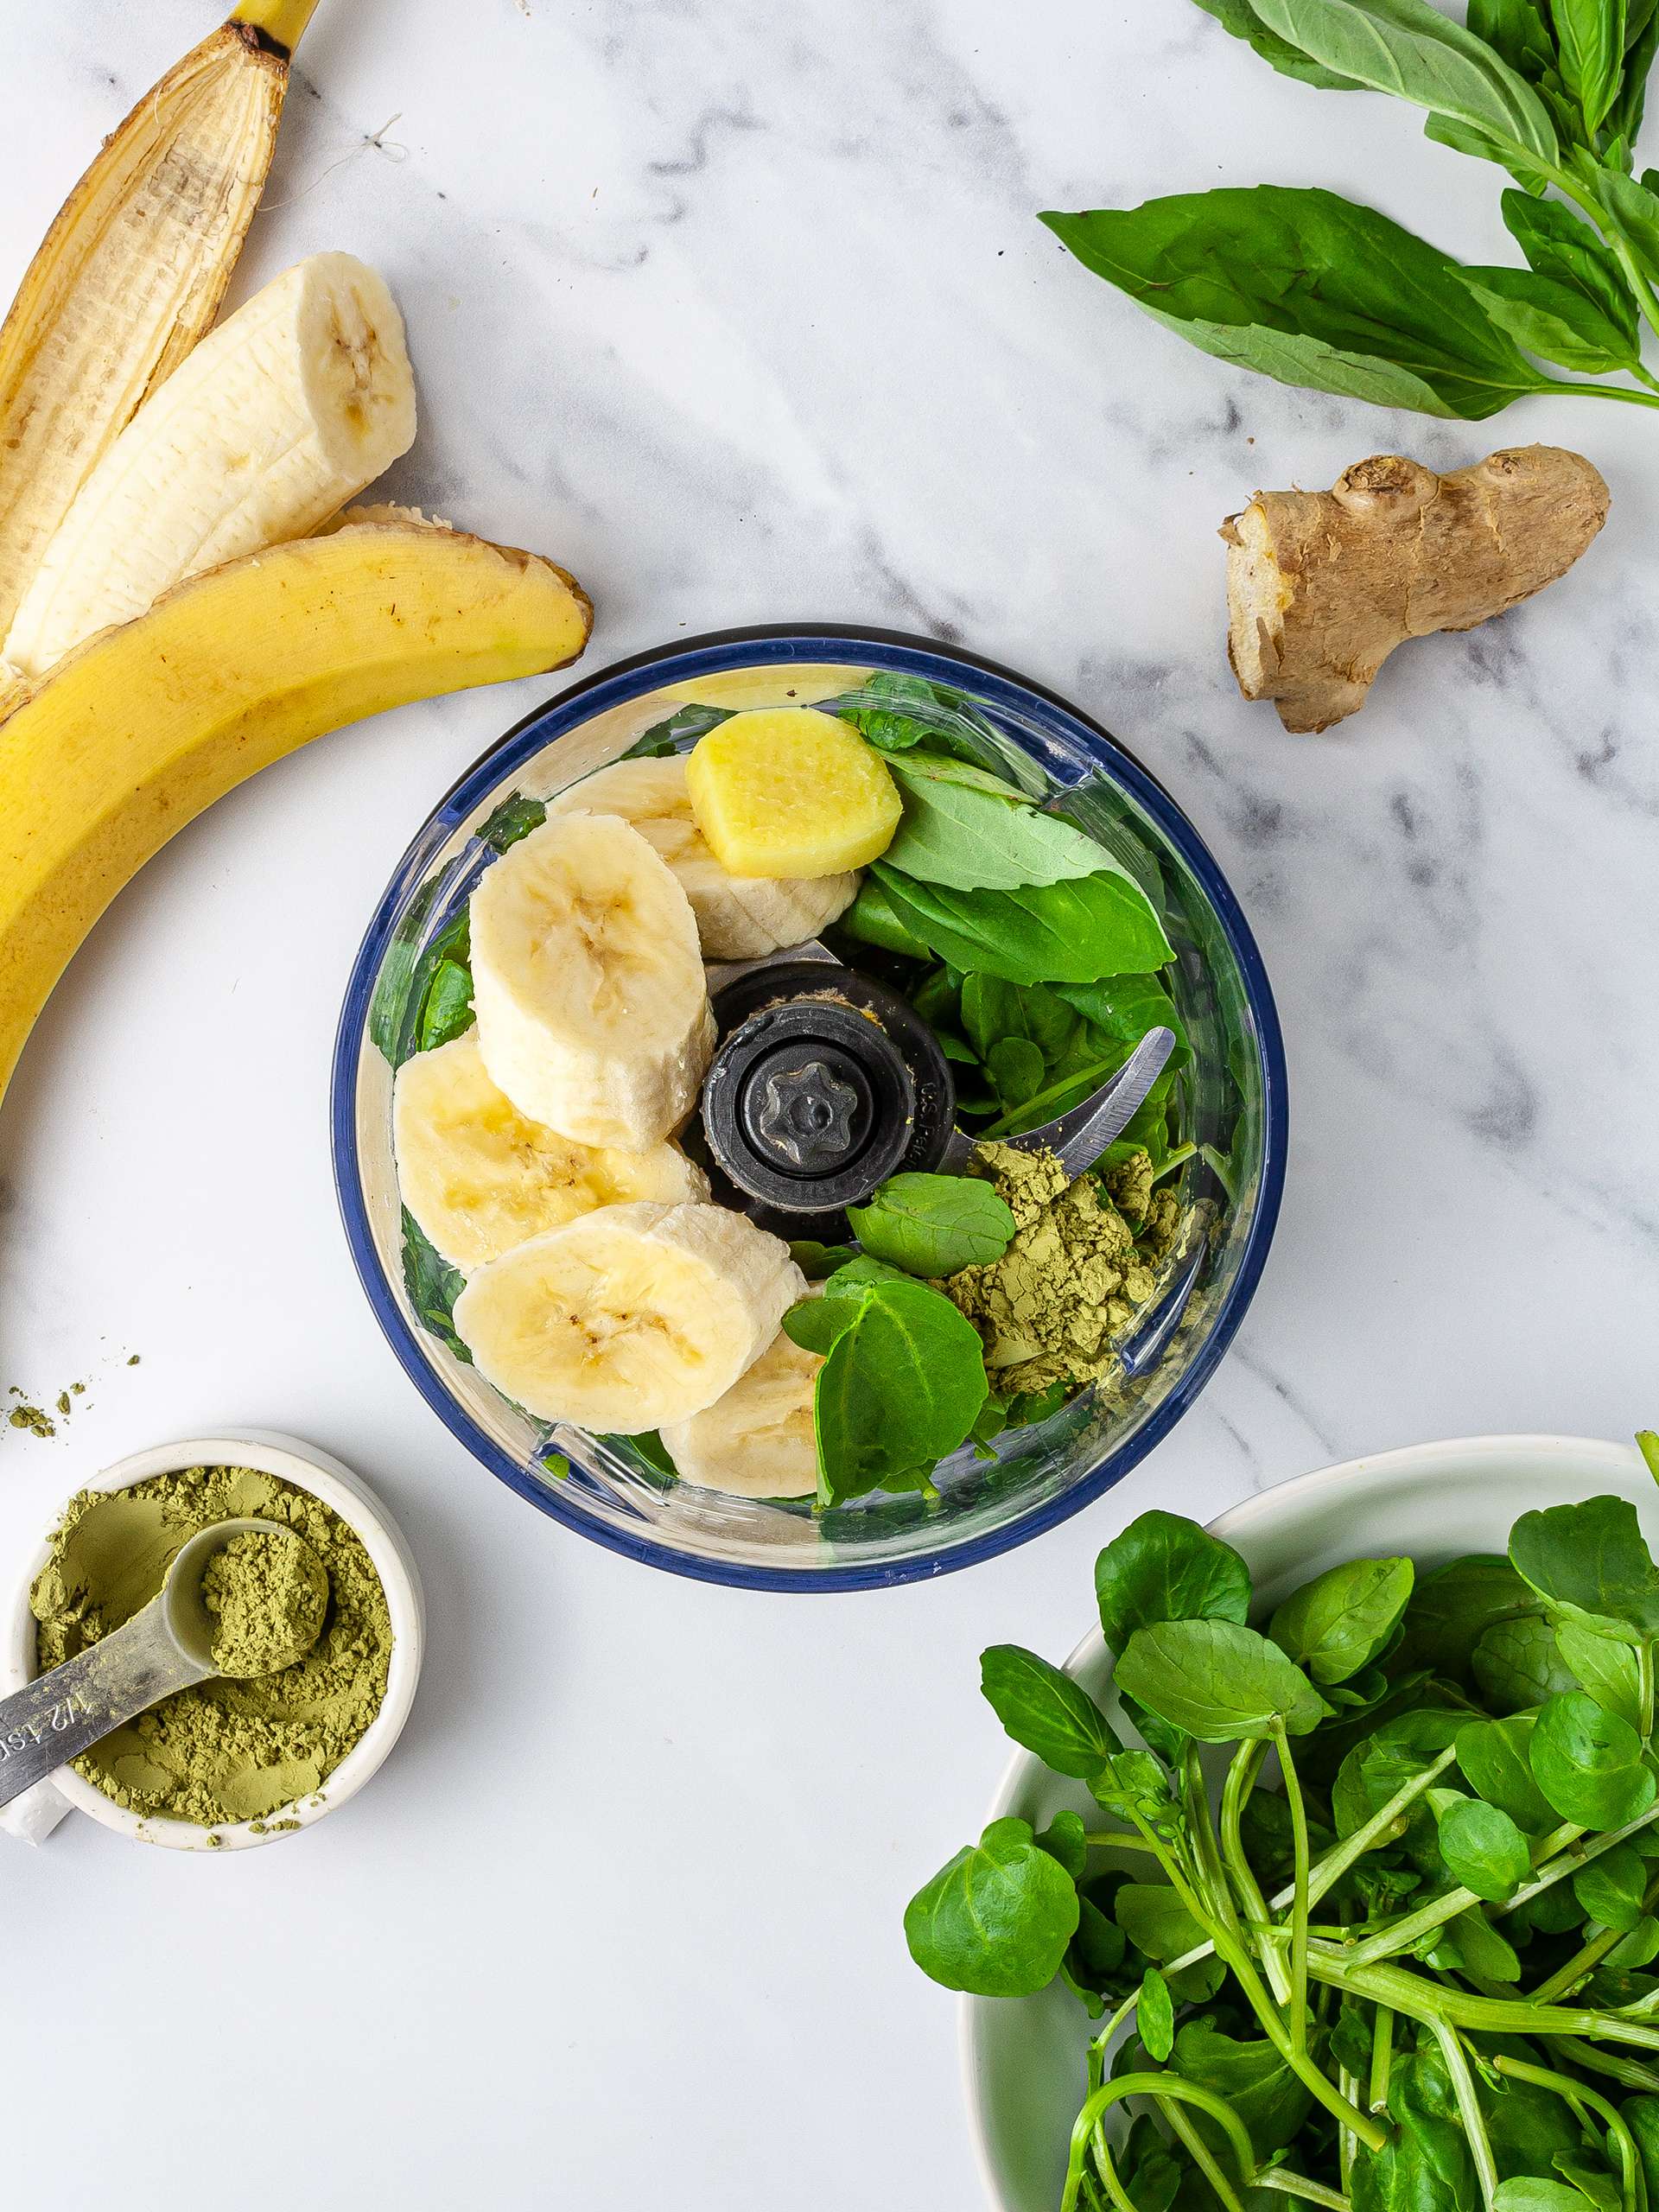 Bananas, watercress, basil, ginger, matcha powder in a food processor for green smoothie.